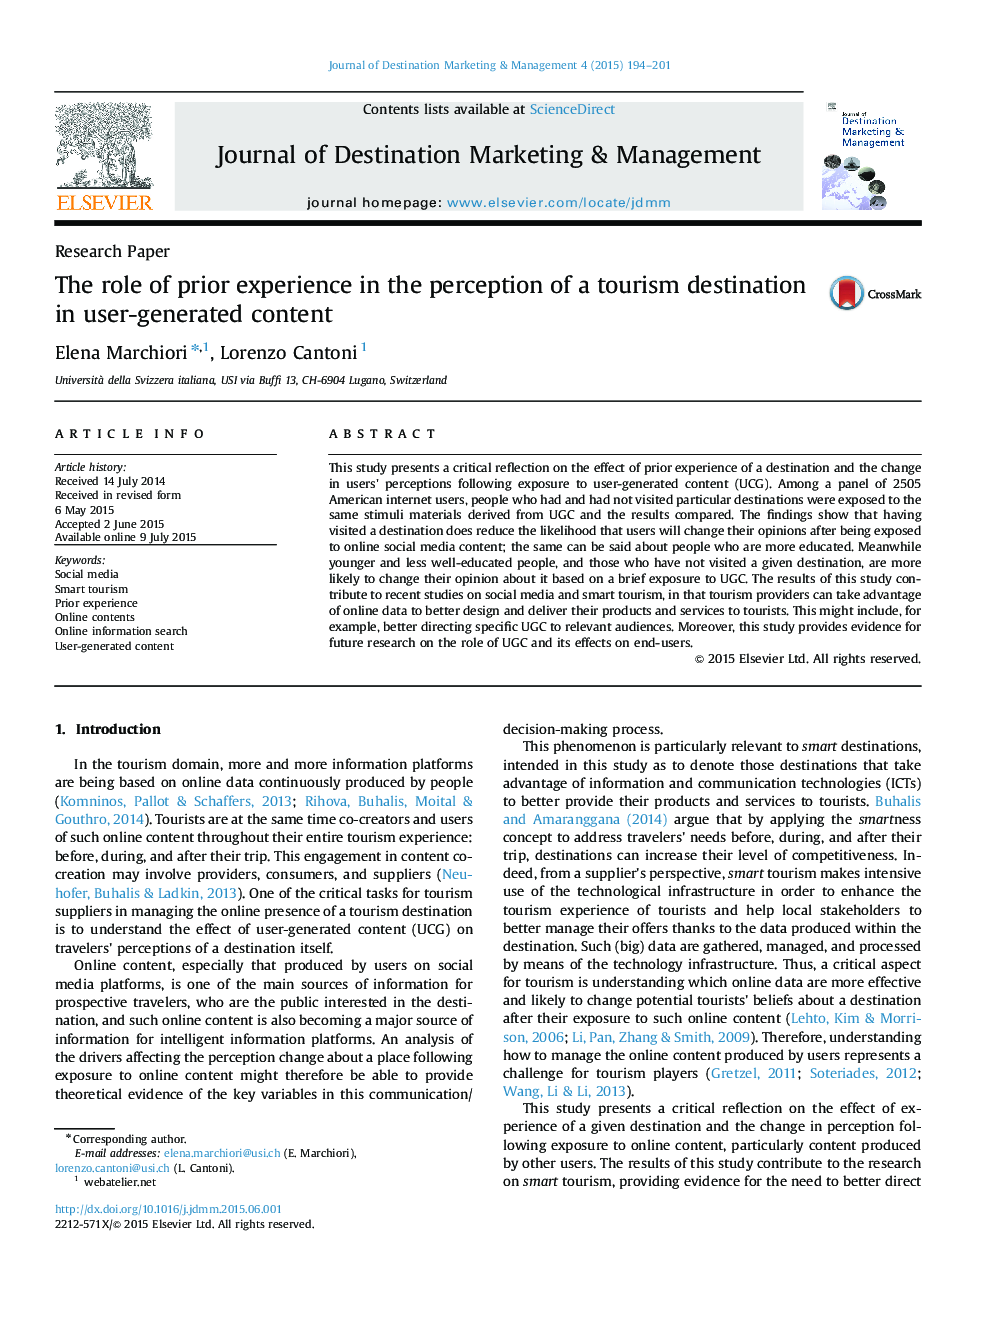 The role of prior experience in the perception of a tourism destination in user-generated content